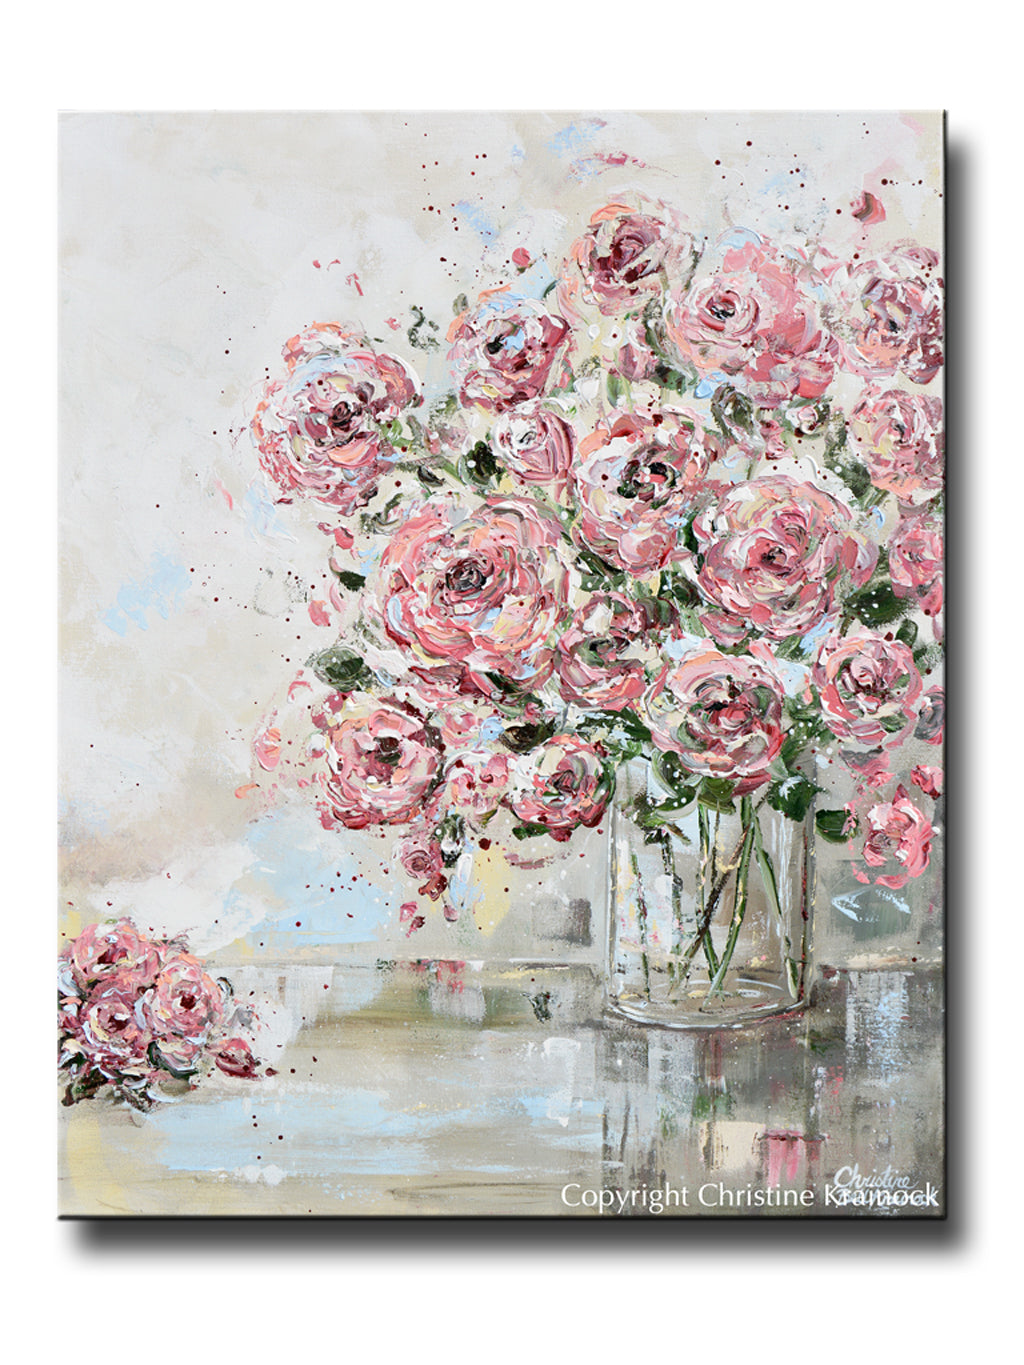 ORIGINAL Art Abstract Floral Painting Textured Pink Flowers Bouquet Roses Wall Decor 24x30"